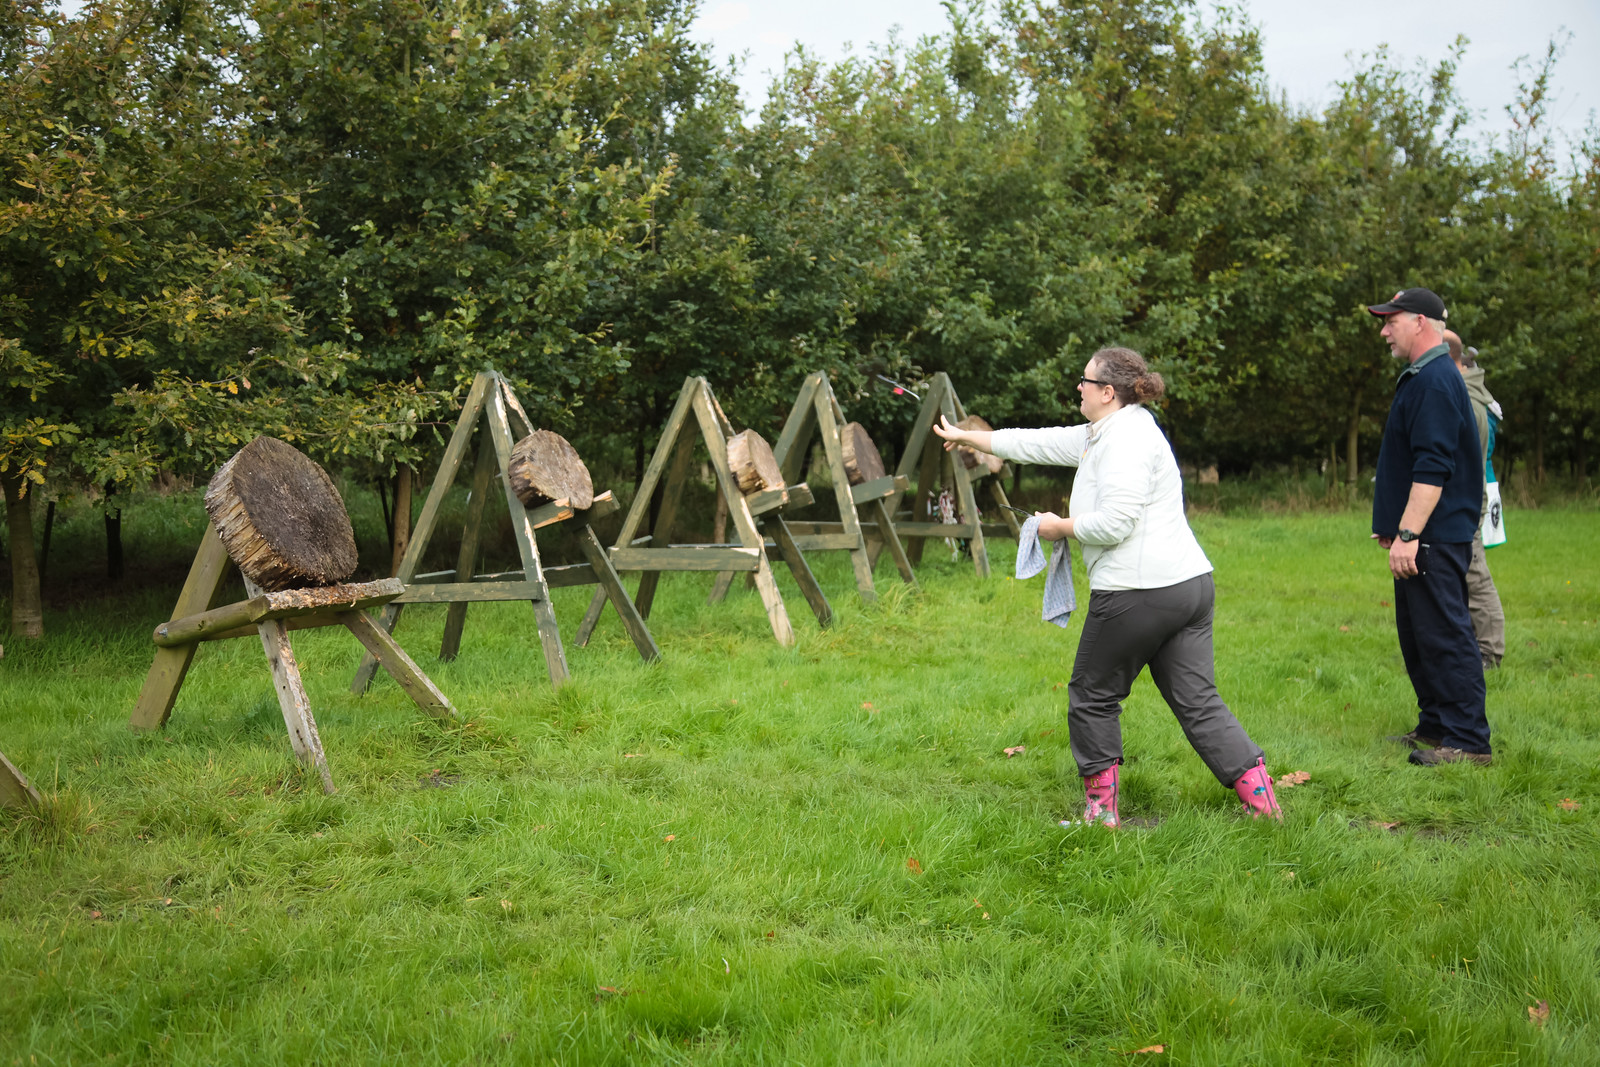 Tomahawk Throwing Course - 18th May 2022